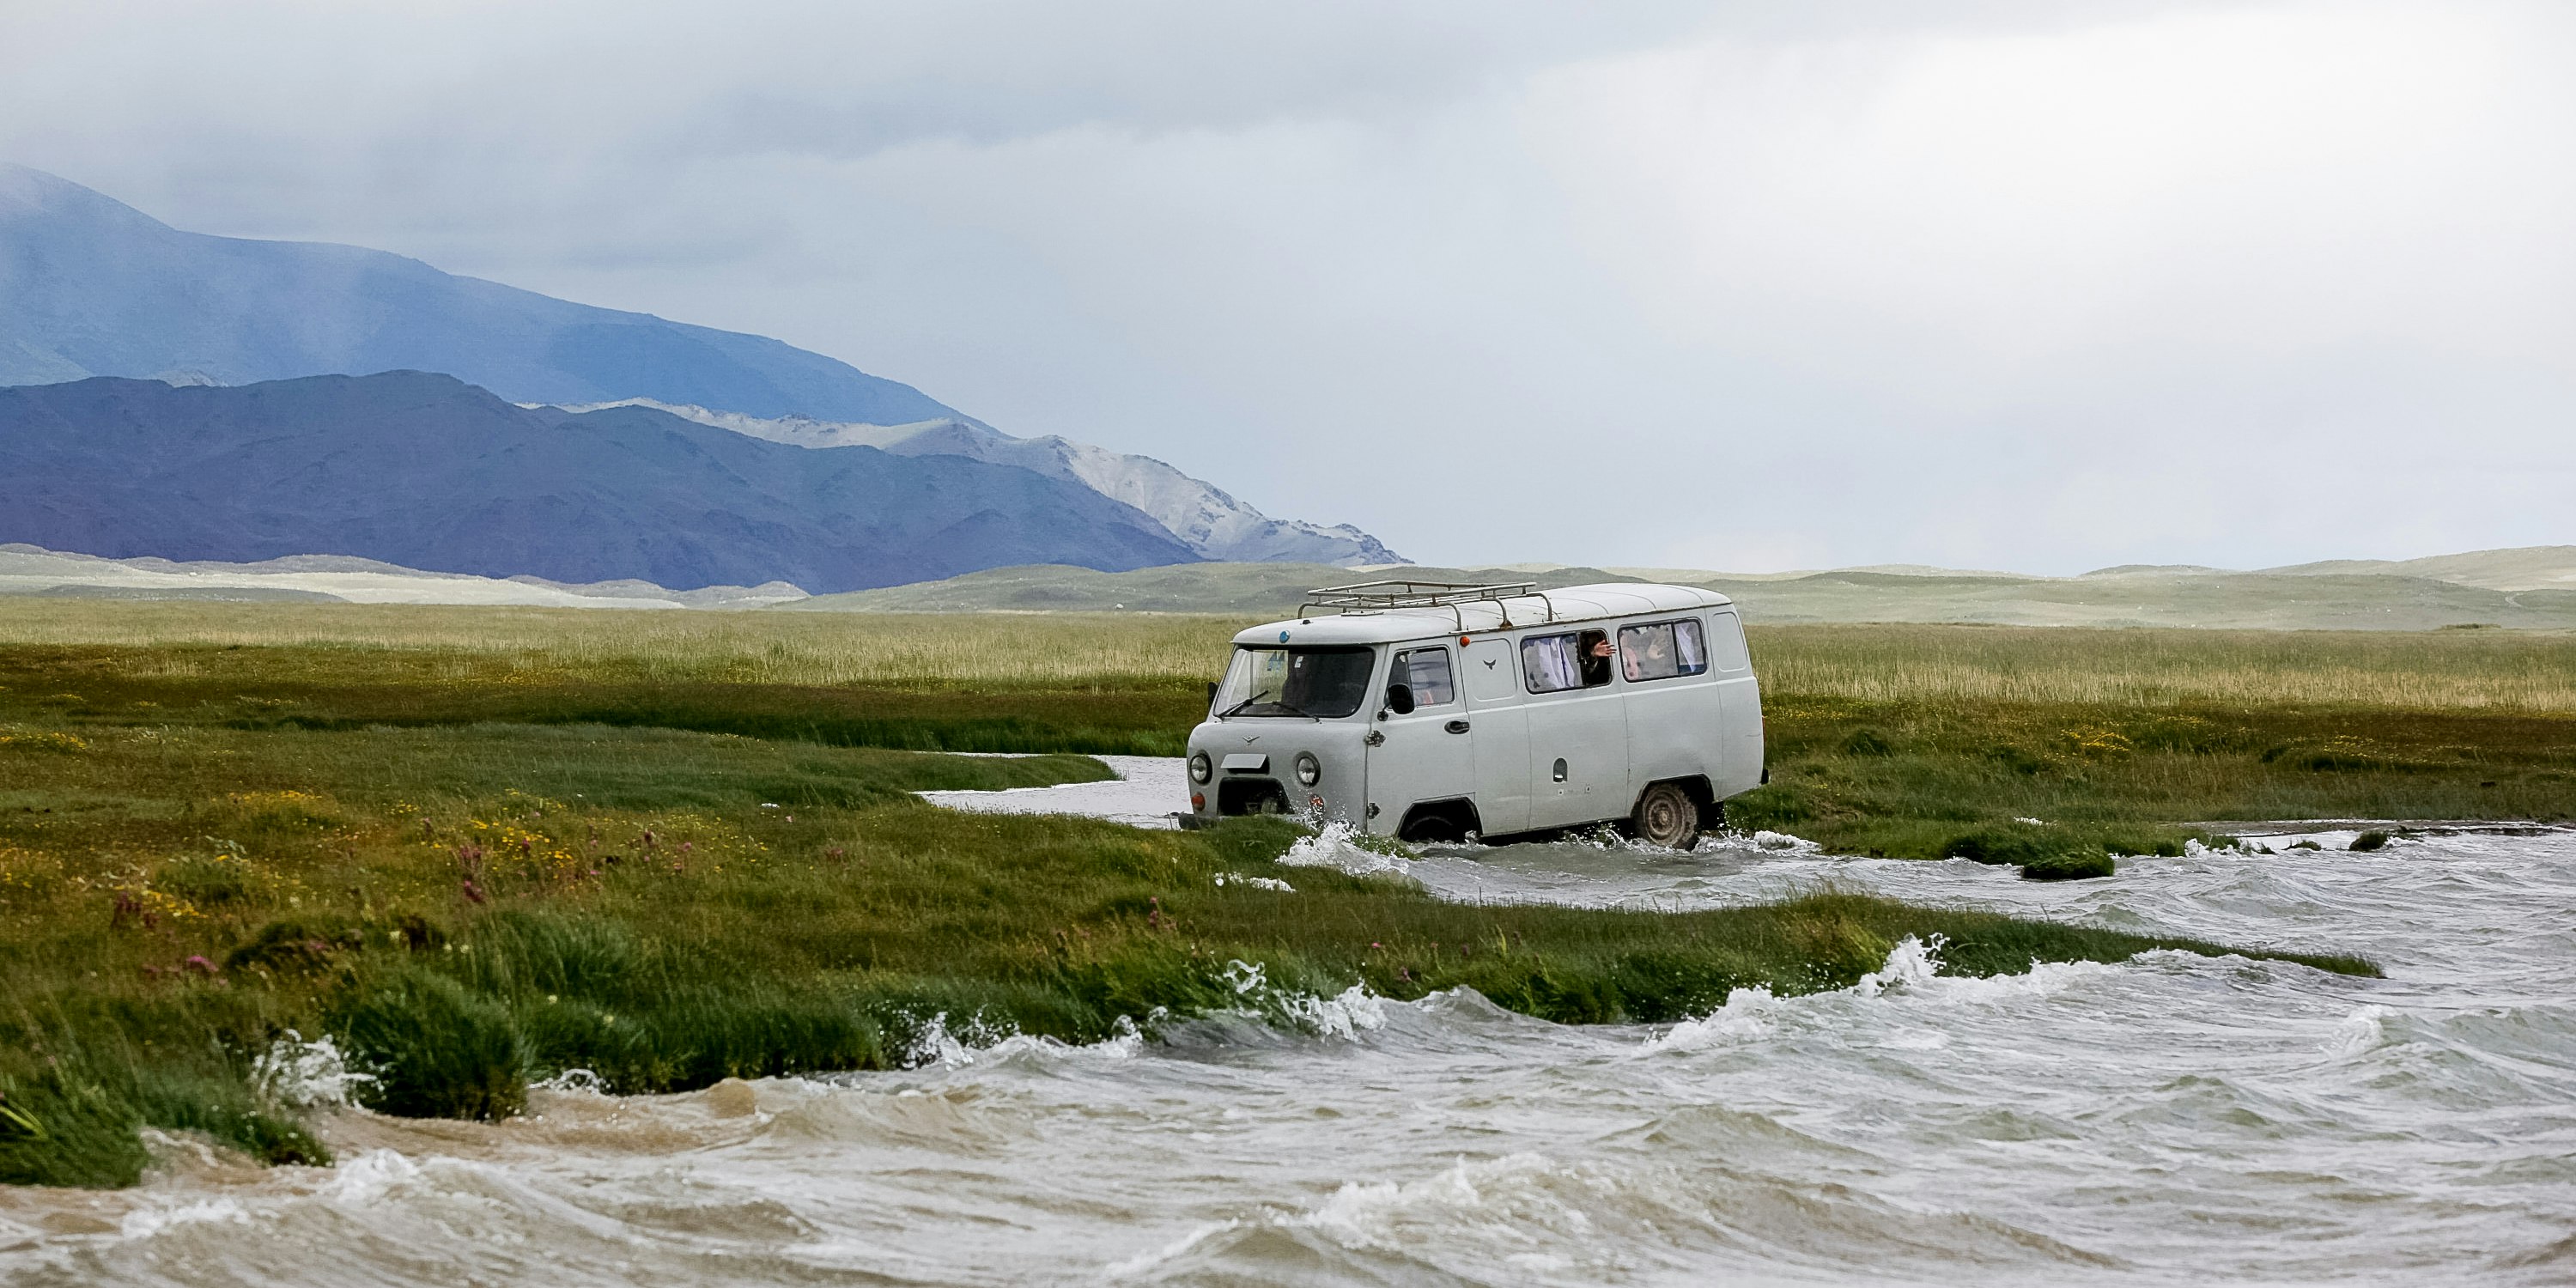 A to Z: Everything You Need to Know About Traveling to Mongolia